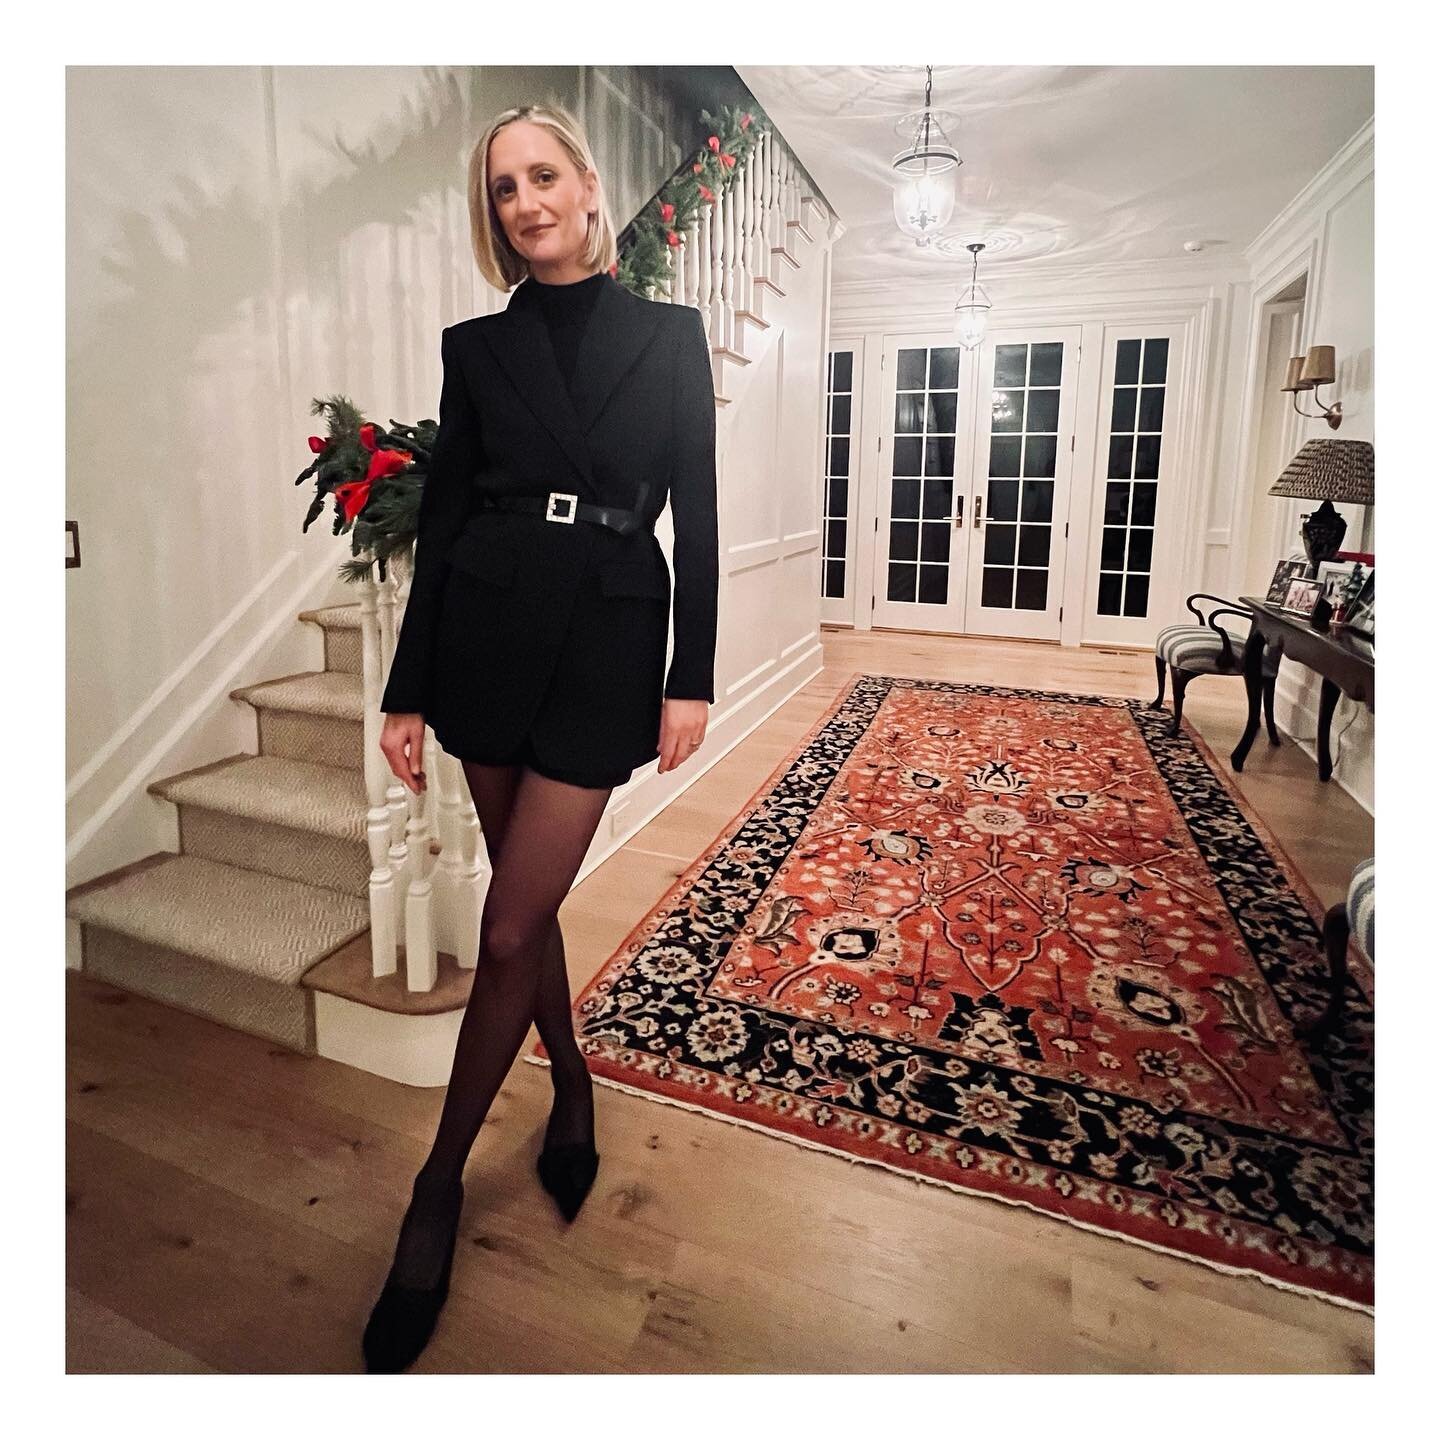 Ladies Holiday🎄cocktails 🍾&hellip; Turned my blazer into a mini dress, added a 💎 belt, sheer tights and a bow kitten heel. Shorts underneath too! 
#fashion #fashionstylist #partyfashion #outfitinspo #outfitinspiration #outfitpost #ootd